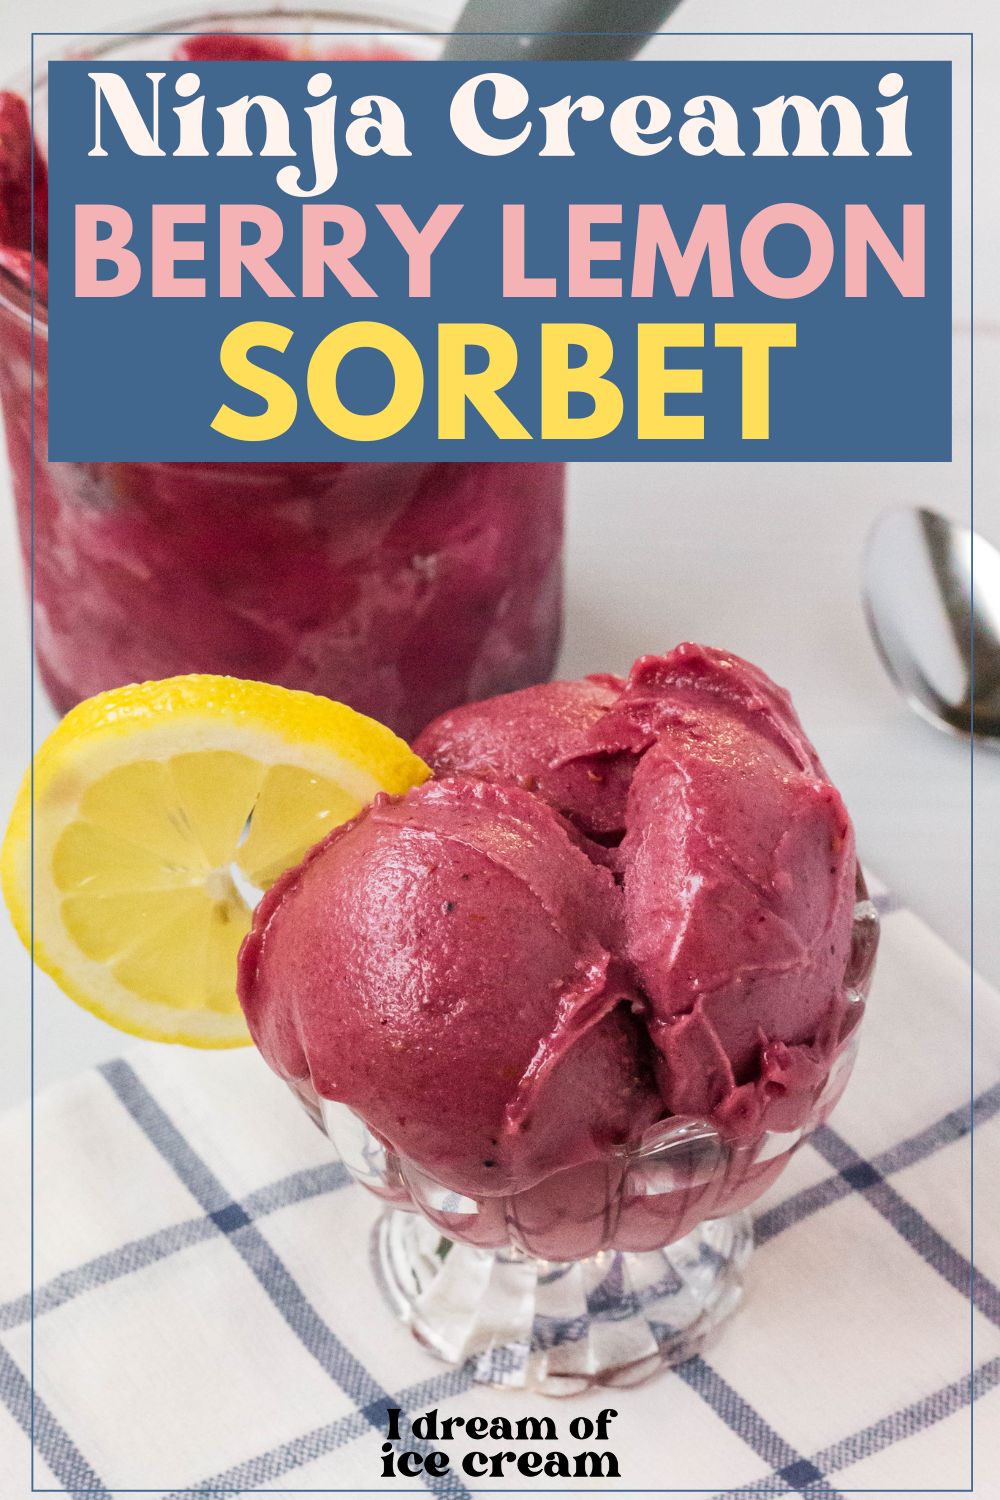 a glass dish with three scoops of Ninja Creami berry lemonade sorbet in it, garnished with a lemon slice. The remaining pint is in the background.